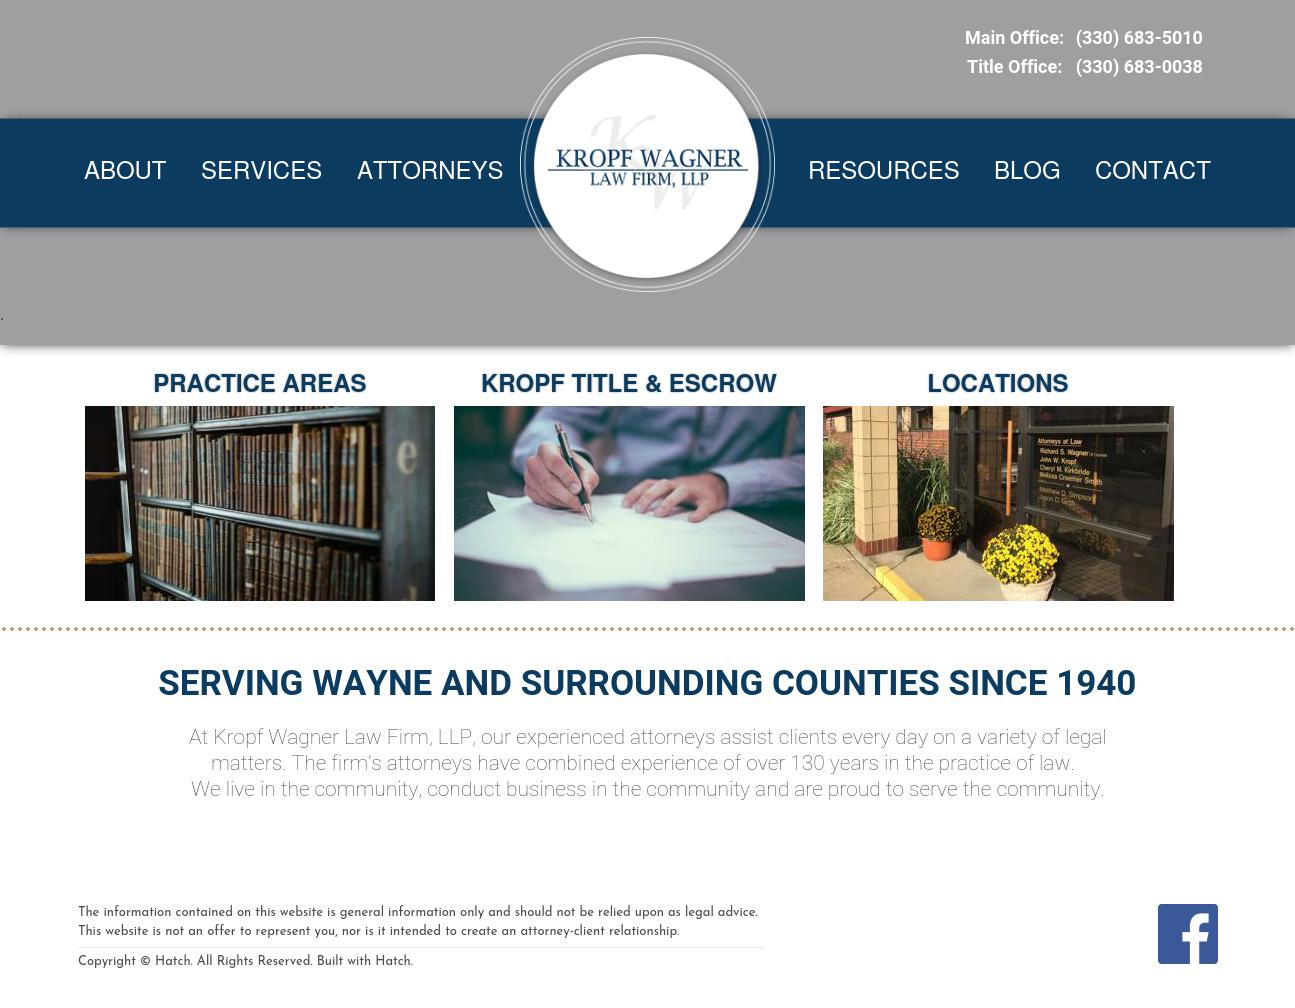 Kropf Wagner Law Firm, LLP - Orrville OH Lawyers